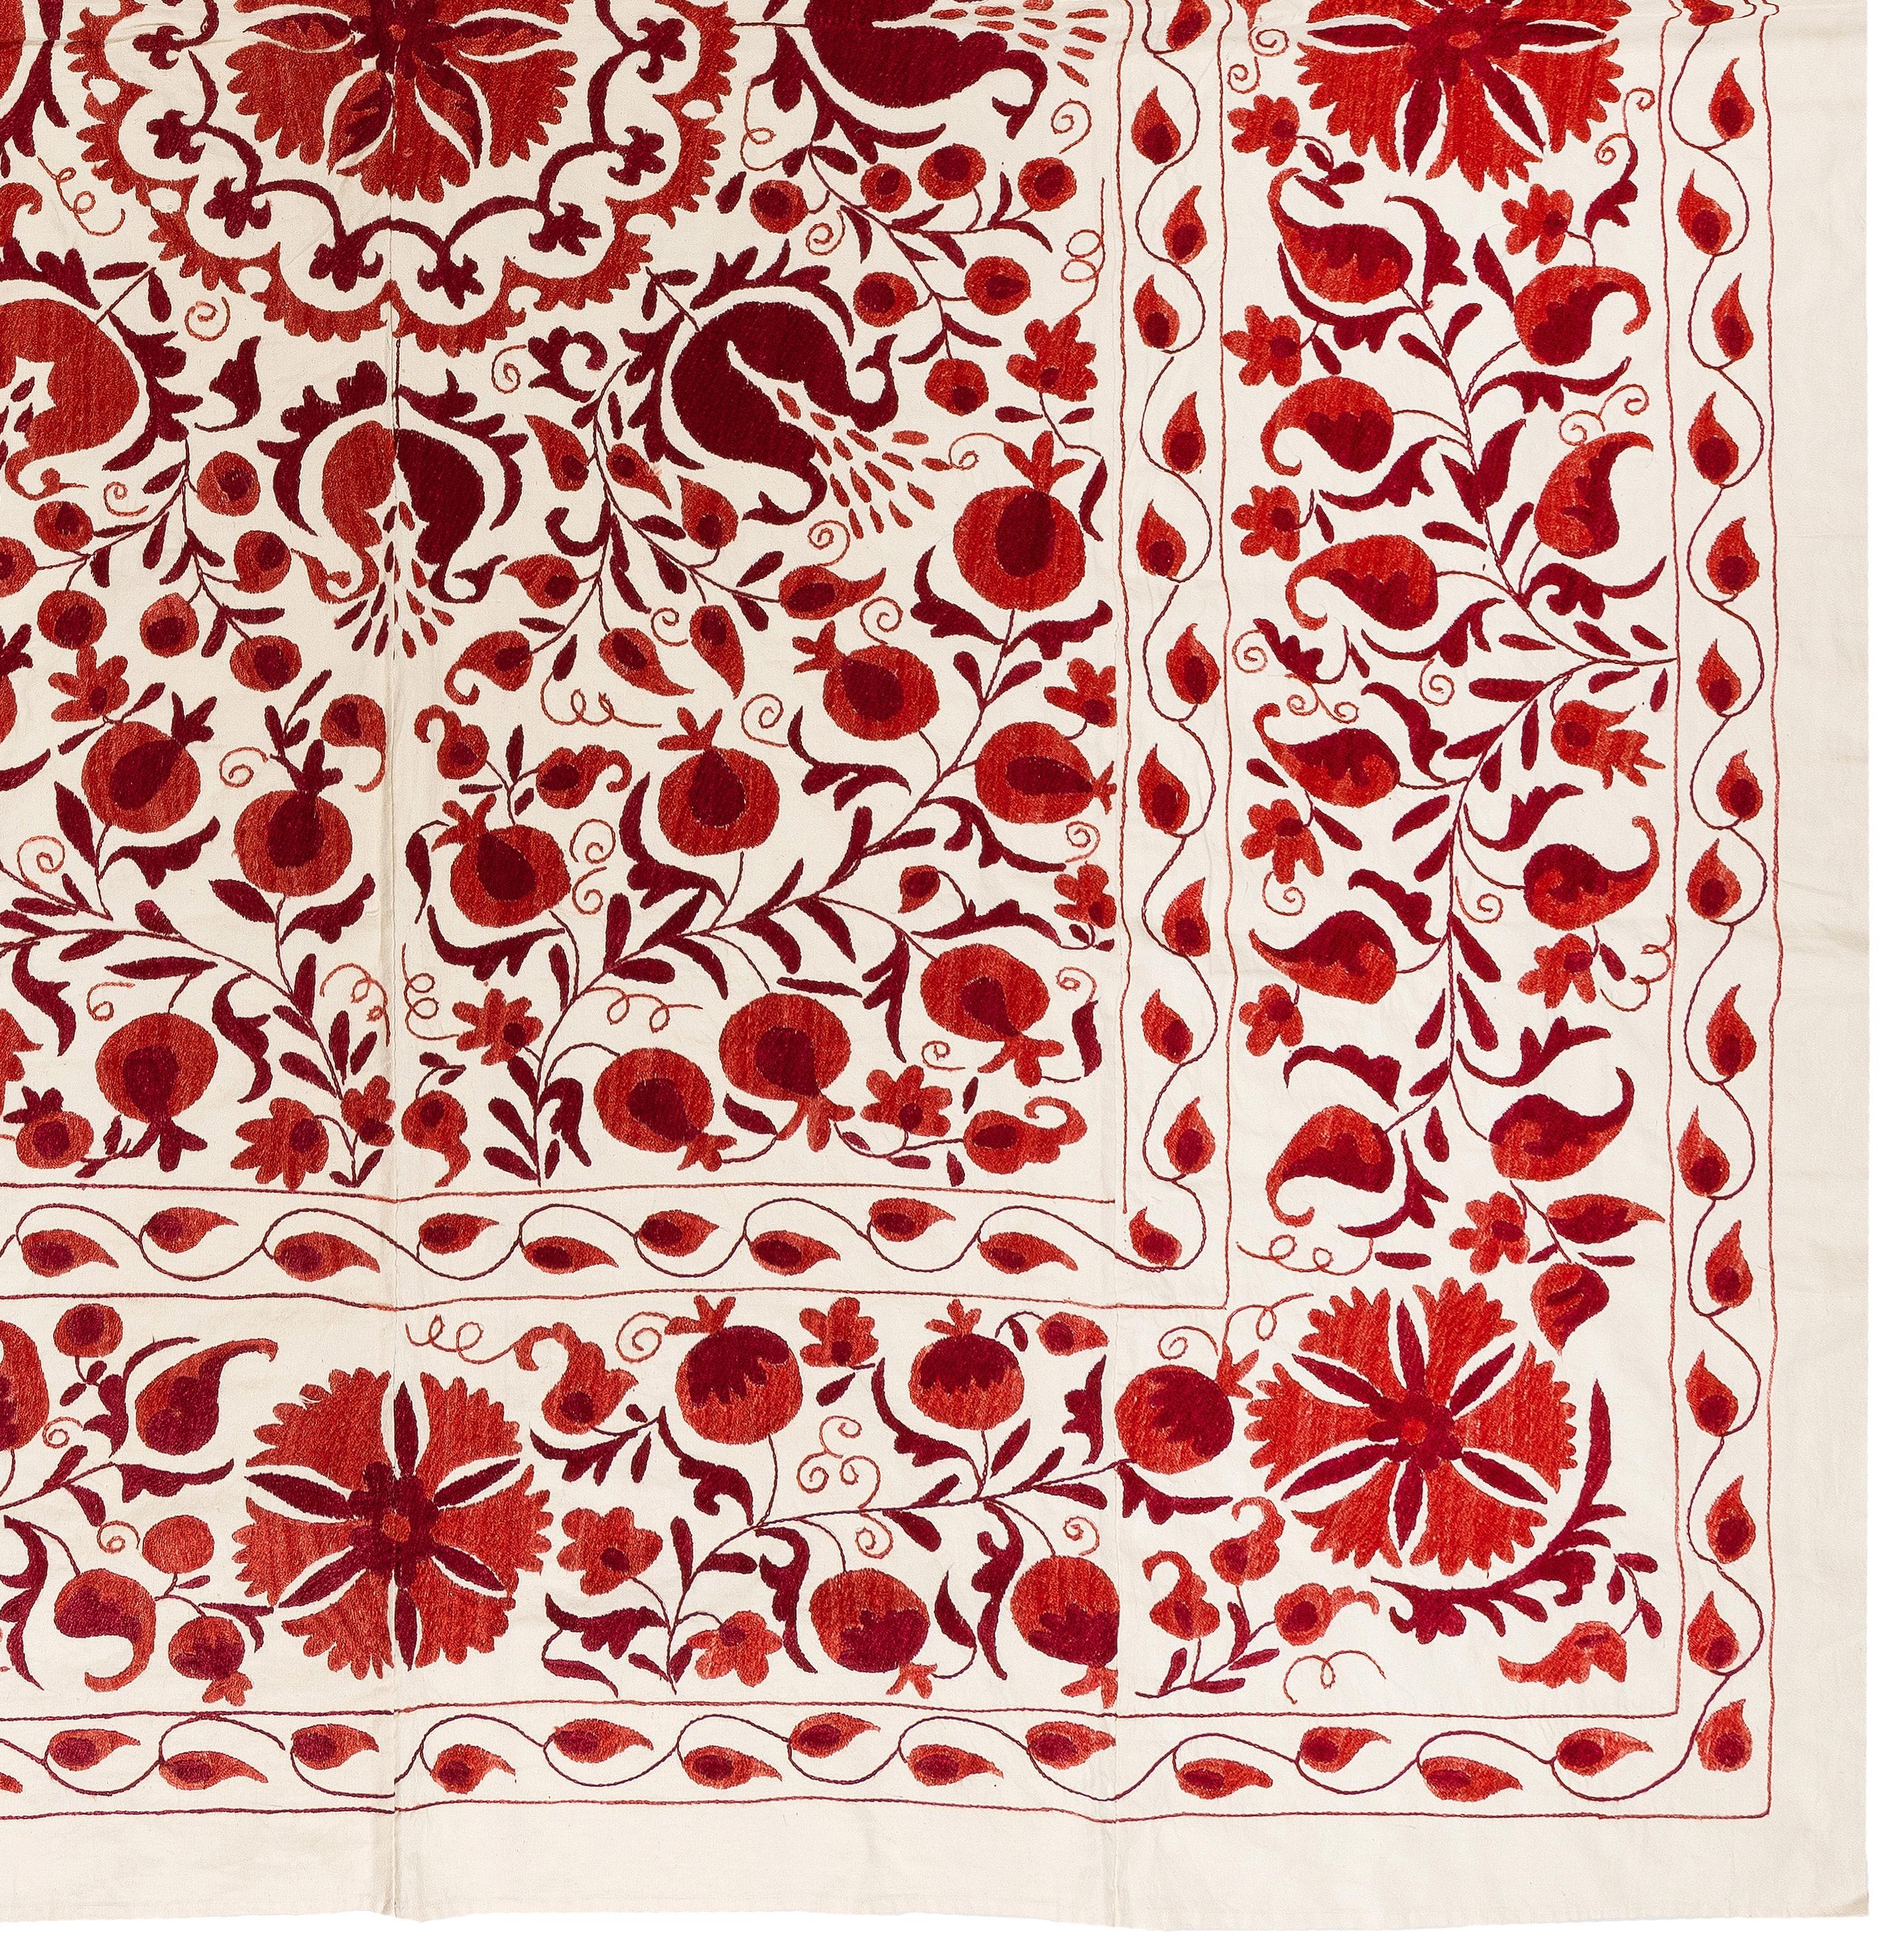 Uzbek 6.5x8 Ft Silk Wall Hanging in Red & Cream, Embroidered Bedspread, New Tablecloth For Sale